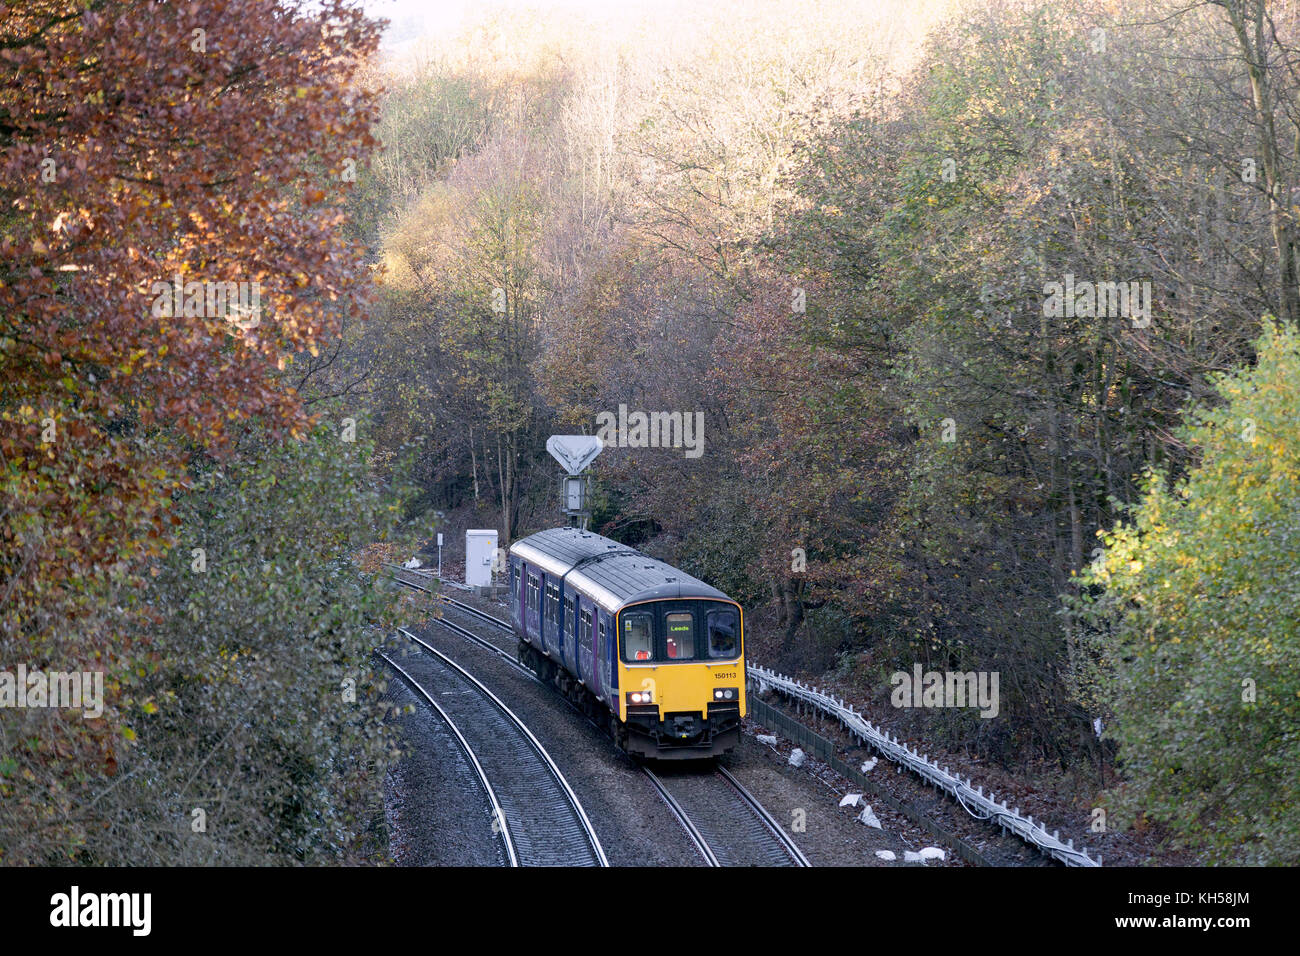 Class 150 DMU approaching Milner Royd Junction bound for Leeds, on the Calder Valley line, Sowerby Bridge, West Yorkshire Stock Photo